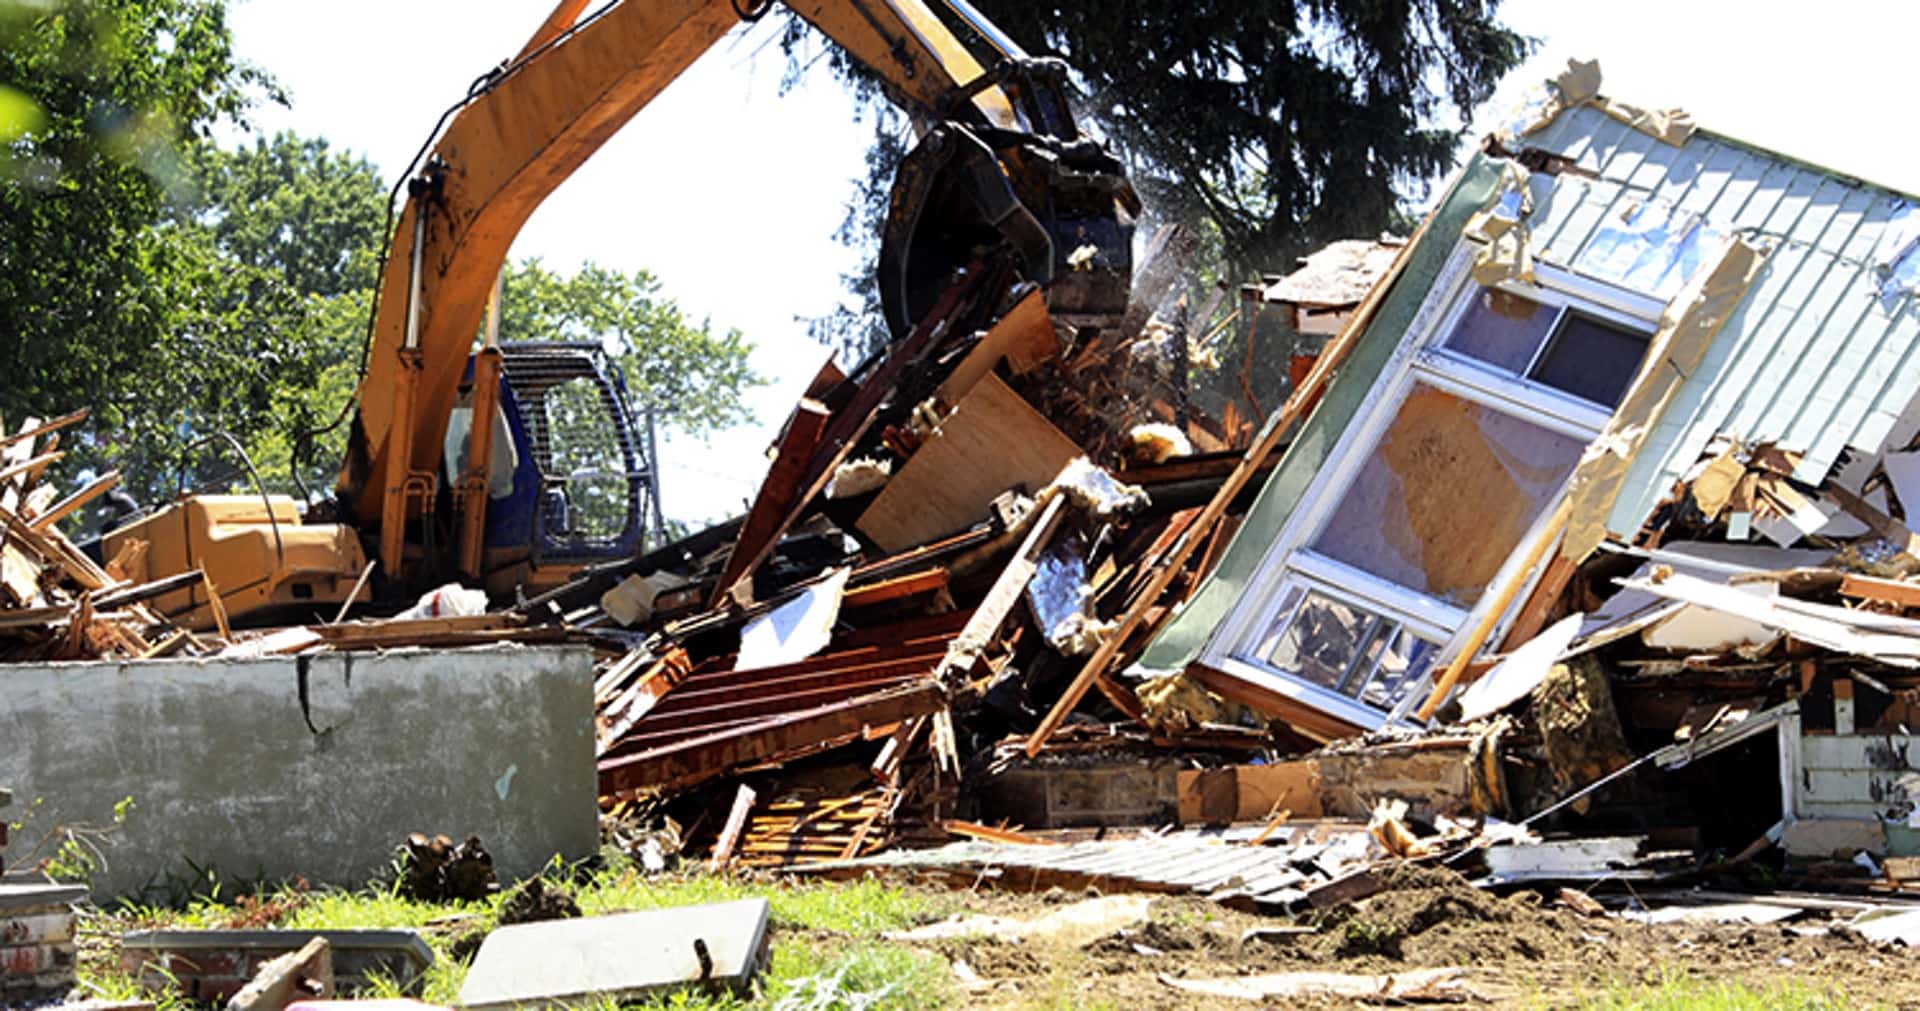 Why Avail The Services Of House Demolition Companies For Your Demolition  Project